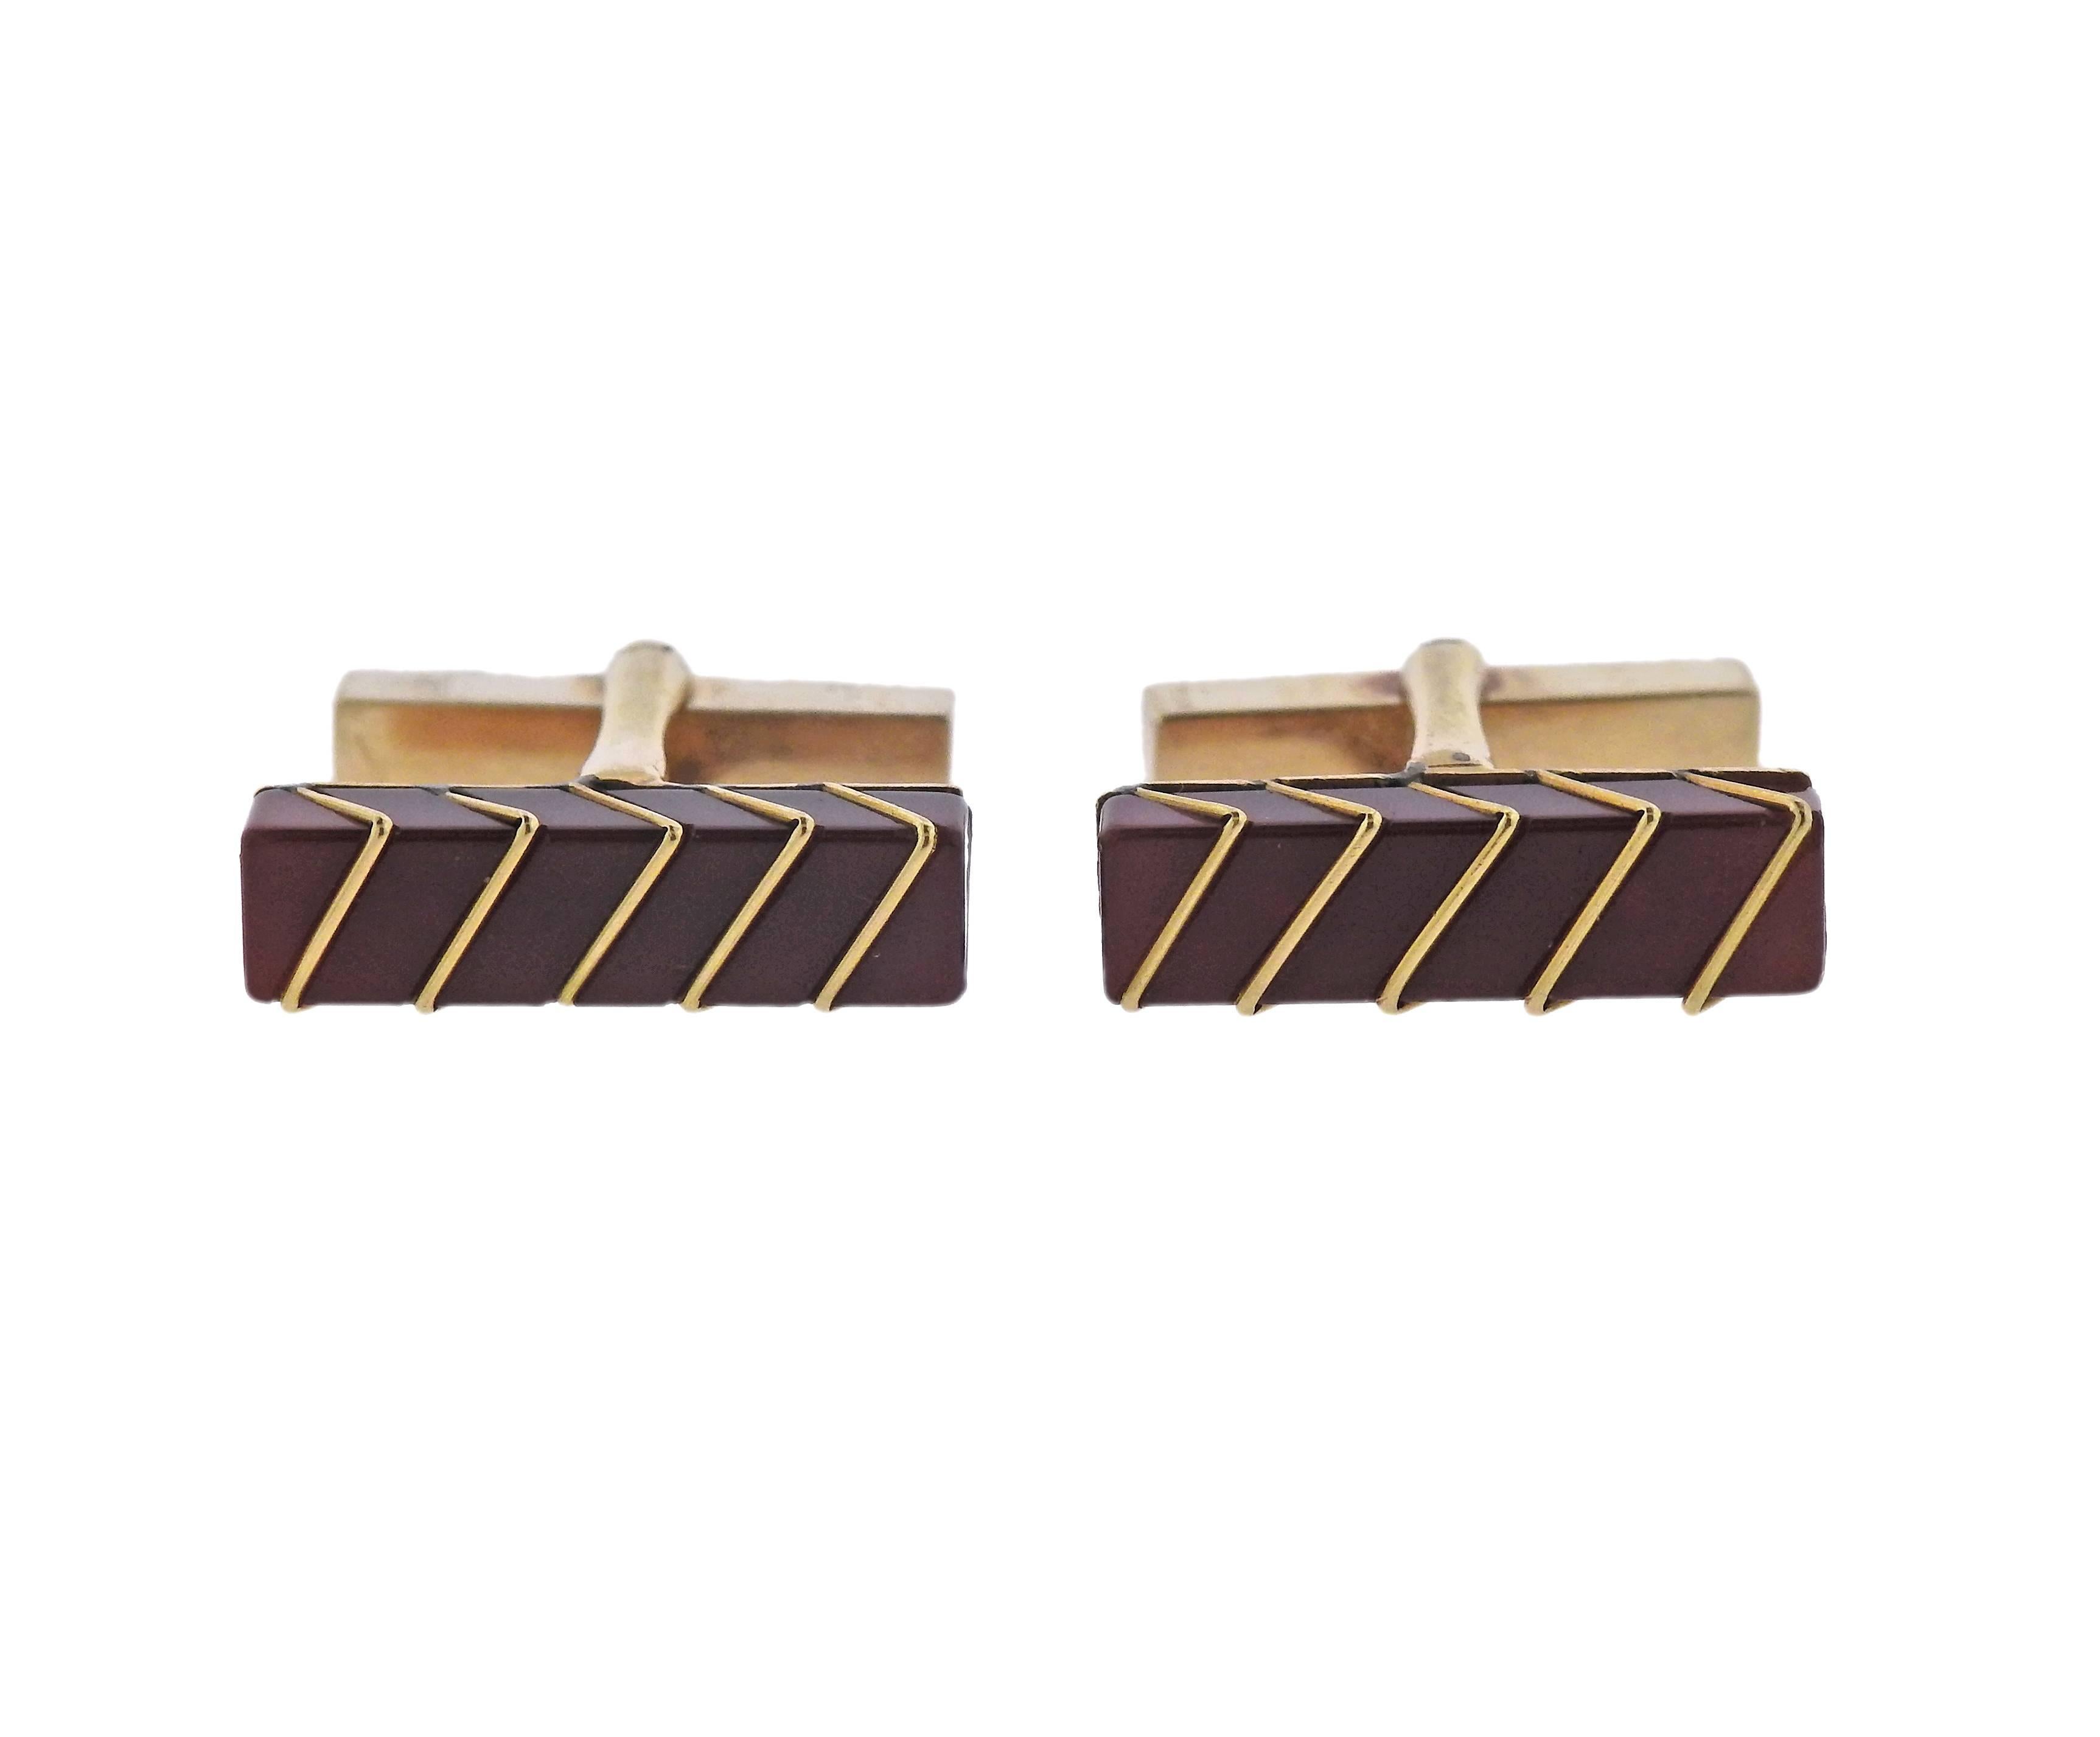 Pair of 18k yellow gold bar cufflinks, crafted by Tiffany & Co, set with carnelian. Top measures 11mm x 6mm. Marked: Tiffany & Co, 18k. Weight - 11.3 grams. 